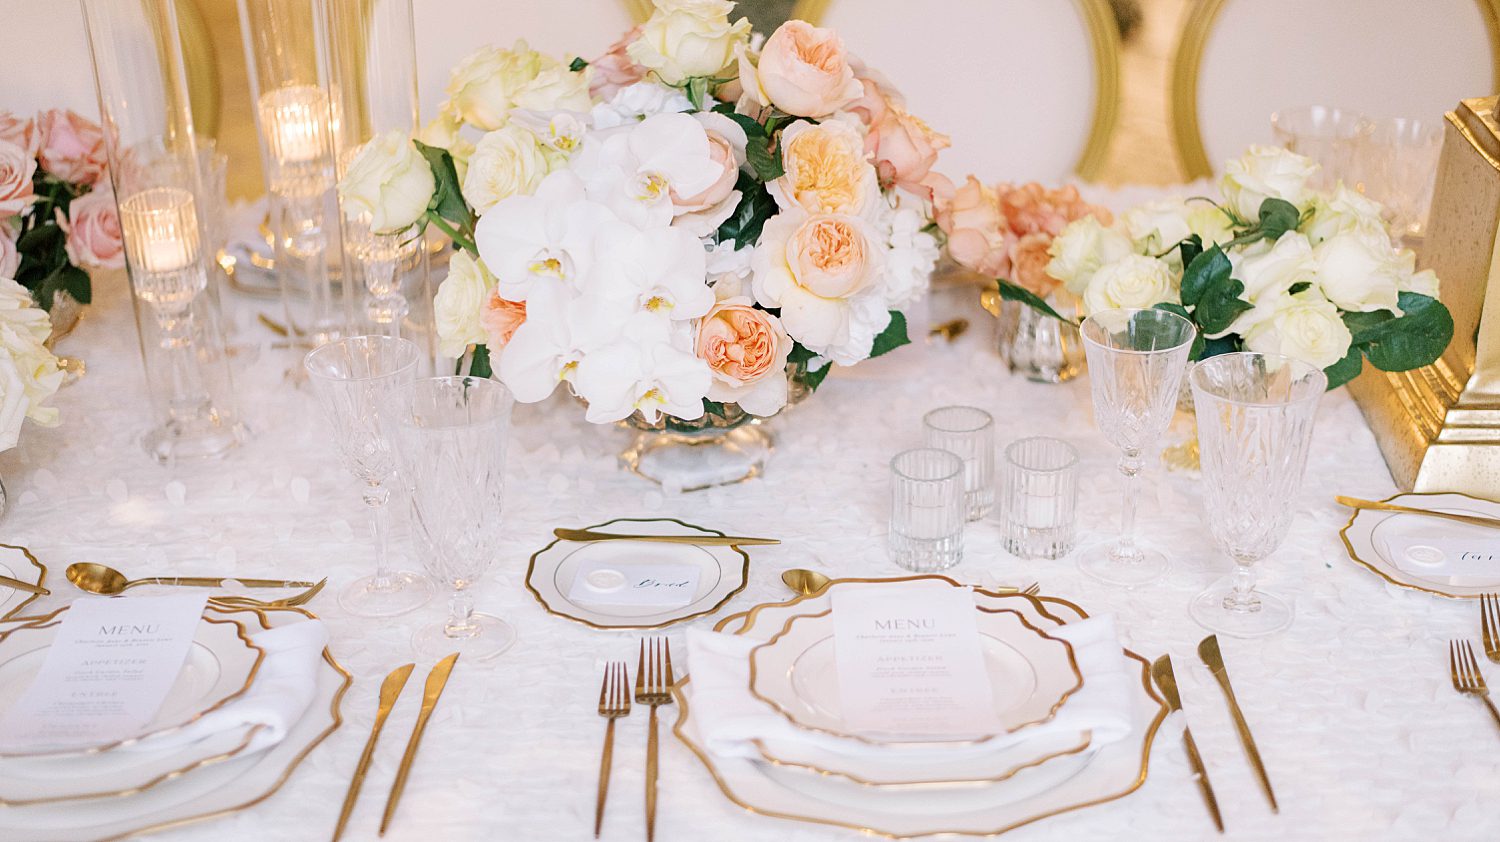 glamorous wedding reception place settings with gold and white